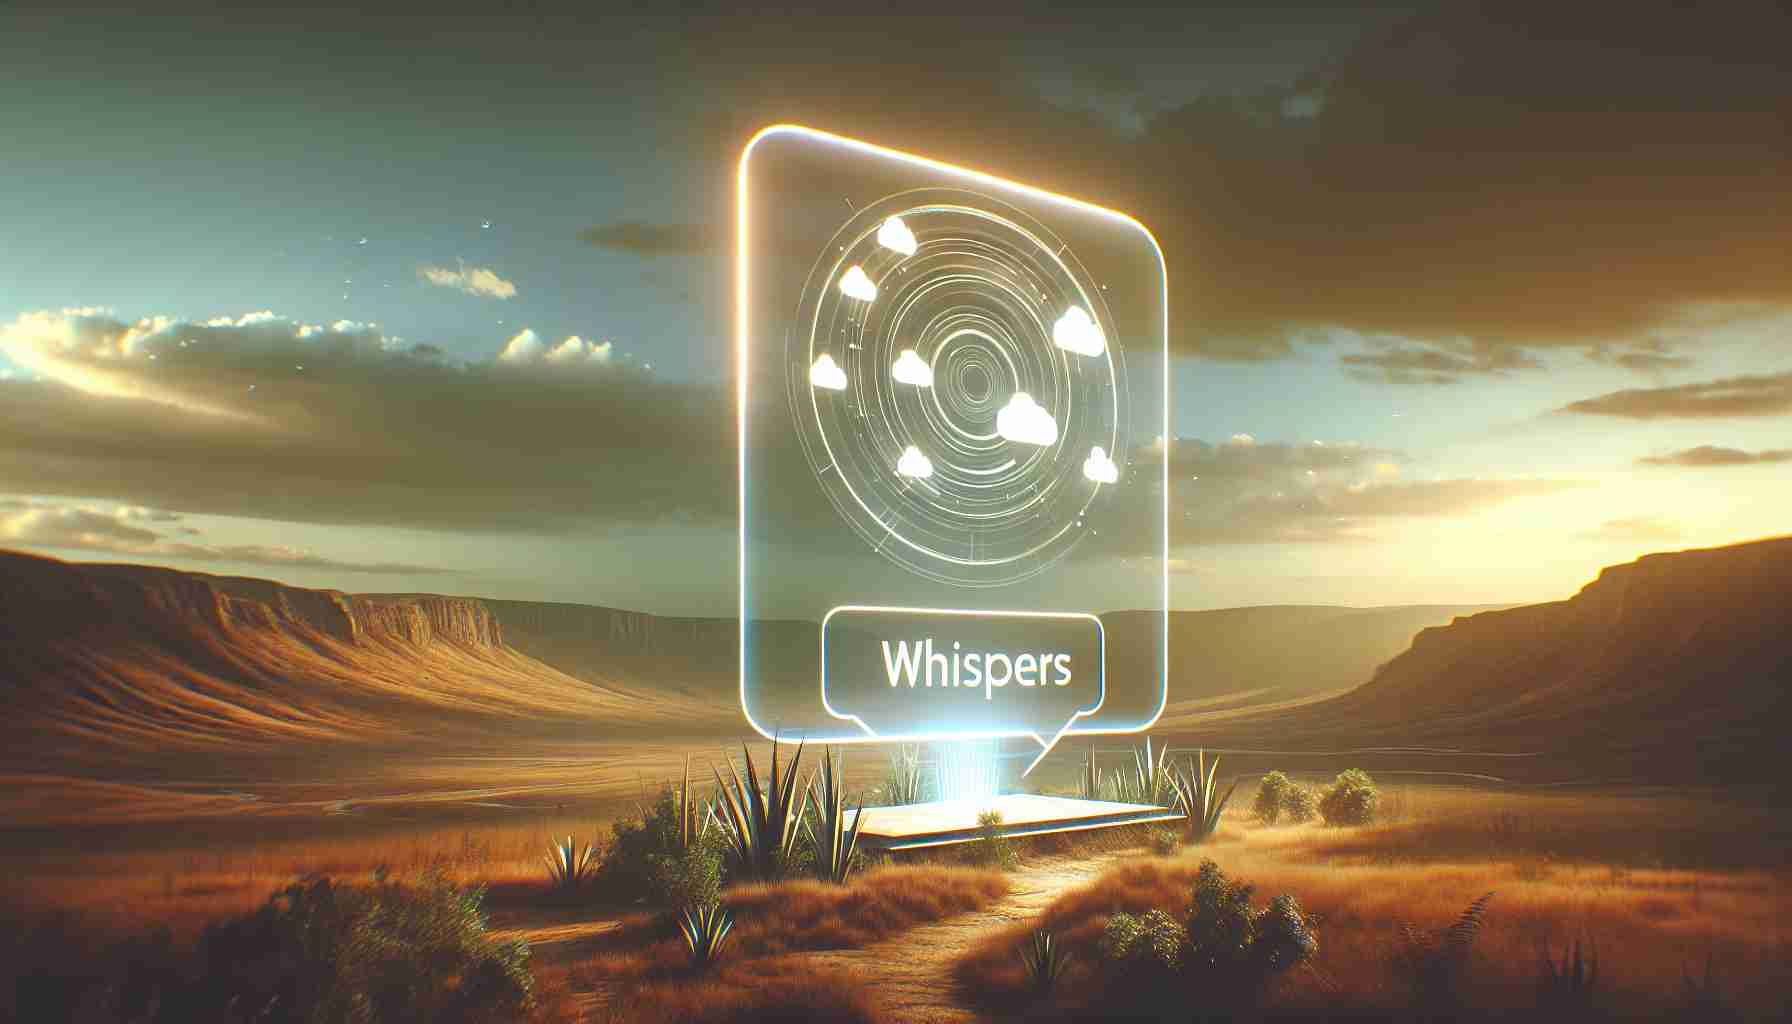 Generate an image that shows a high-definition representation of a new feature on a social media platform. This new feature is named 'Whispers'. Depict it as a conversational style feature with soothing and minimalist design elements which facilitates easier engagements among users. Lend the scene a sense of novelty and excitement to underline its recent introduction.